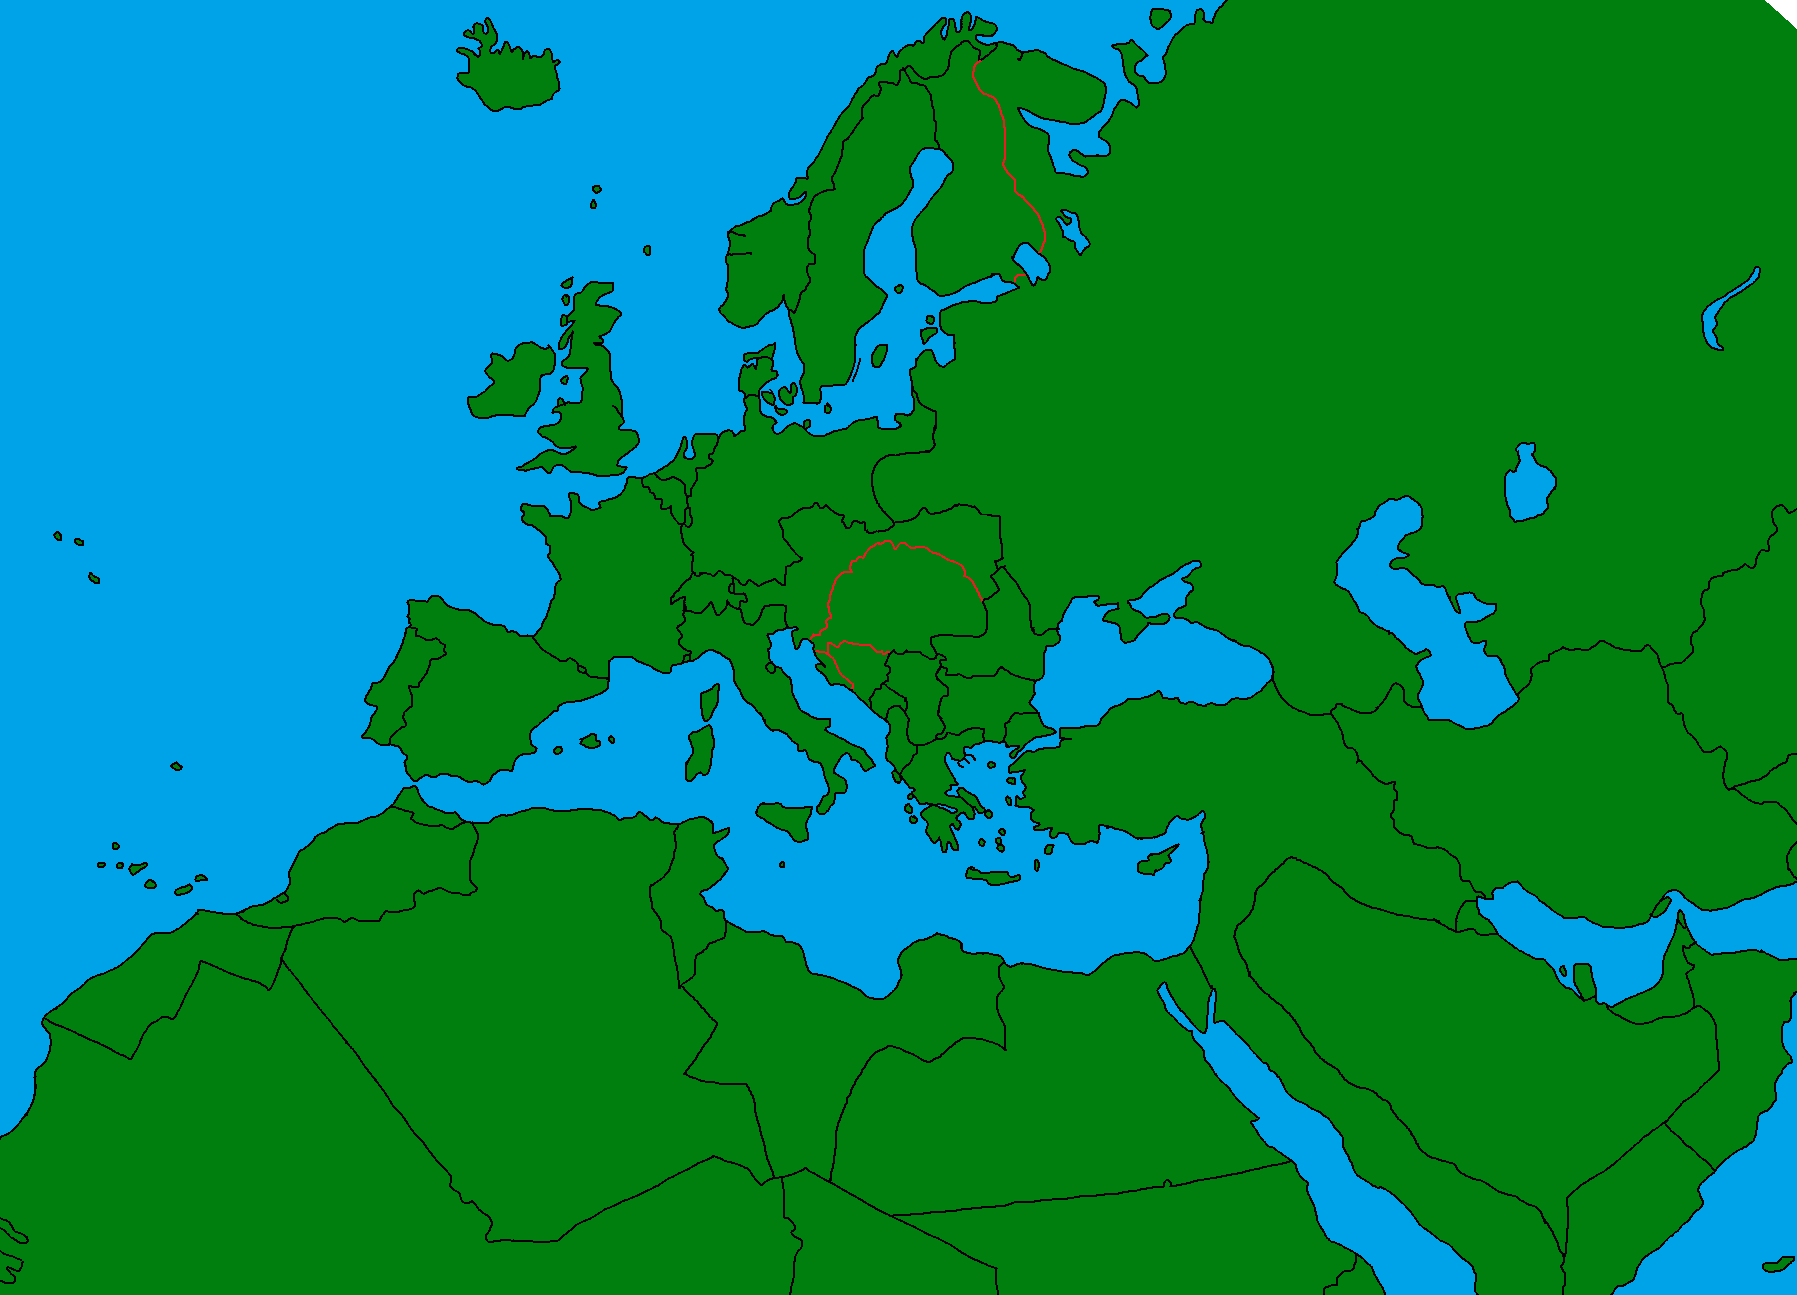 blank map of europe 1938